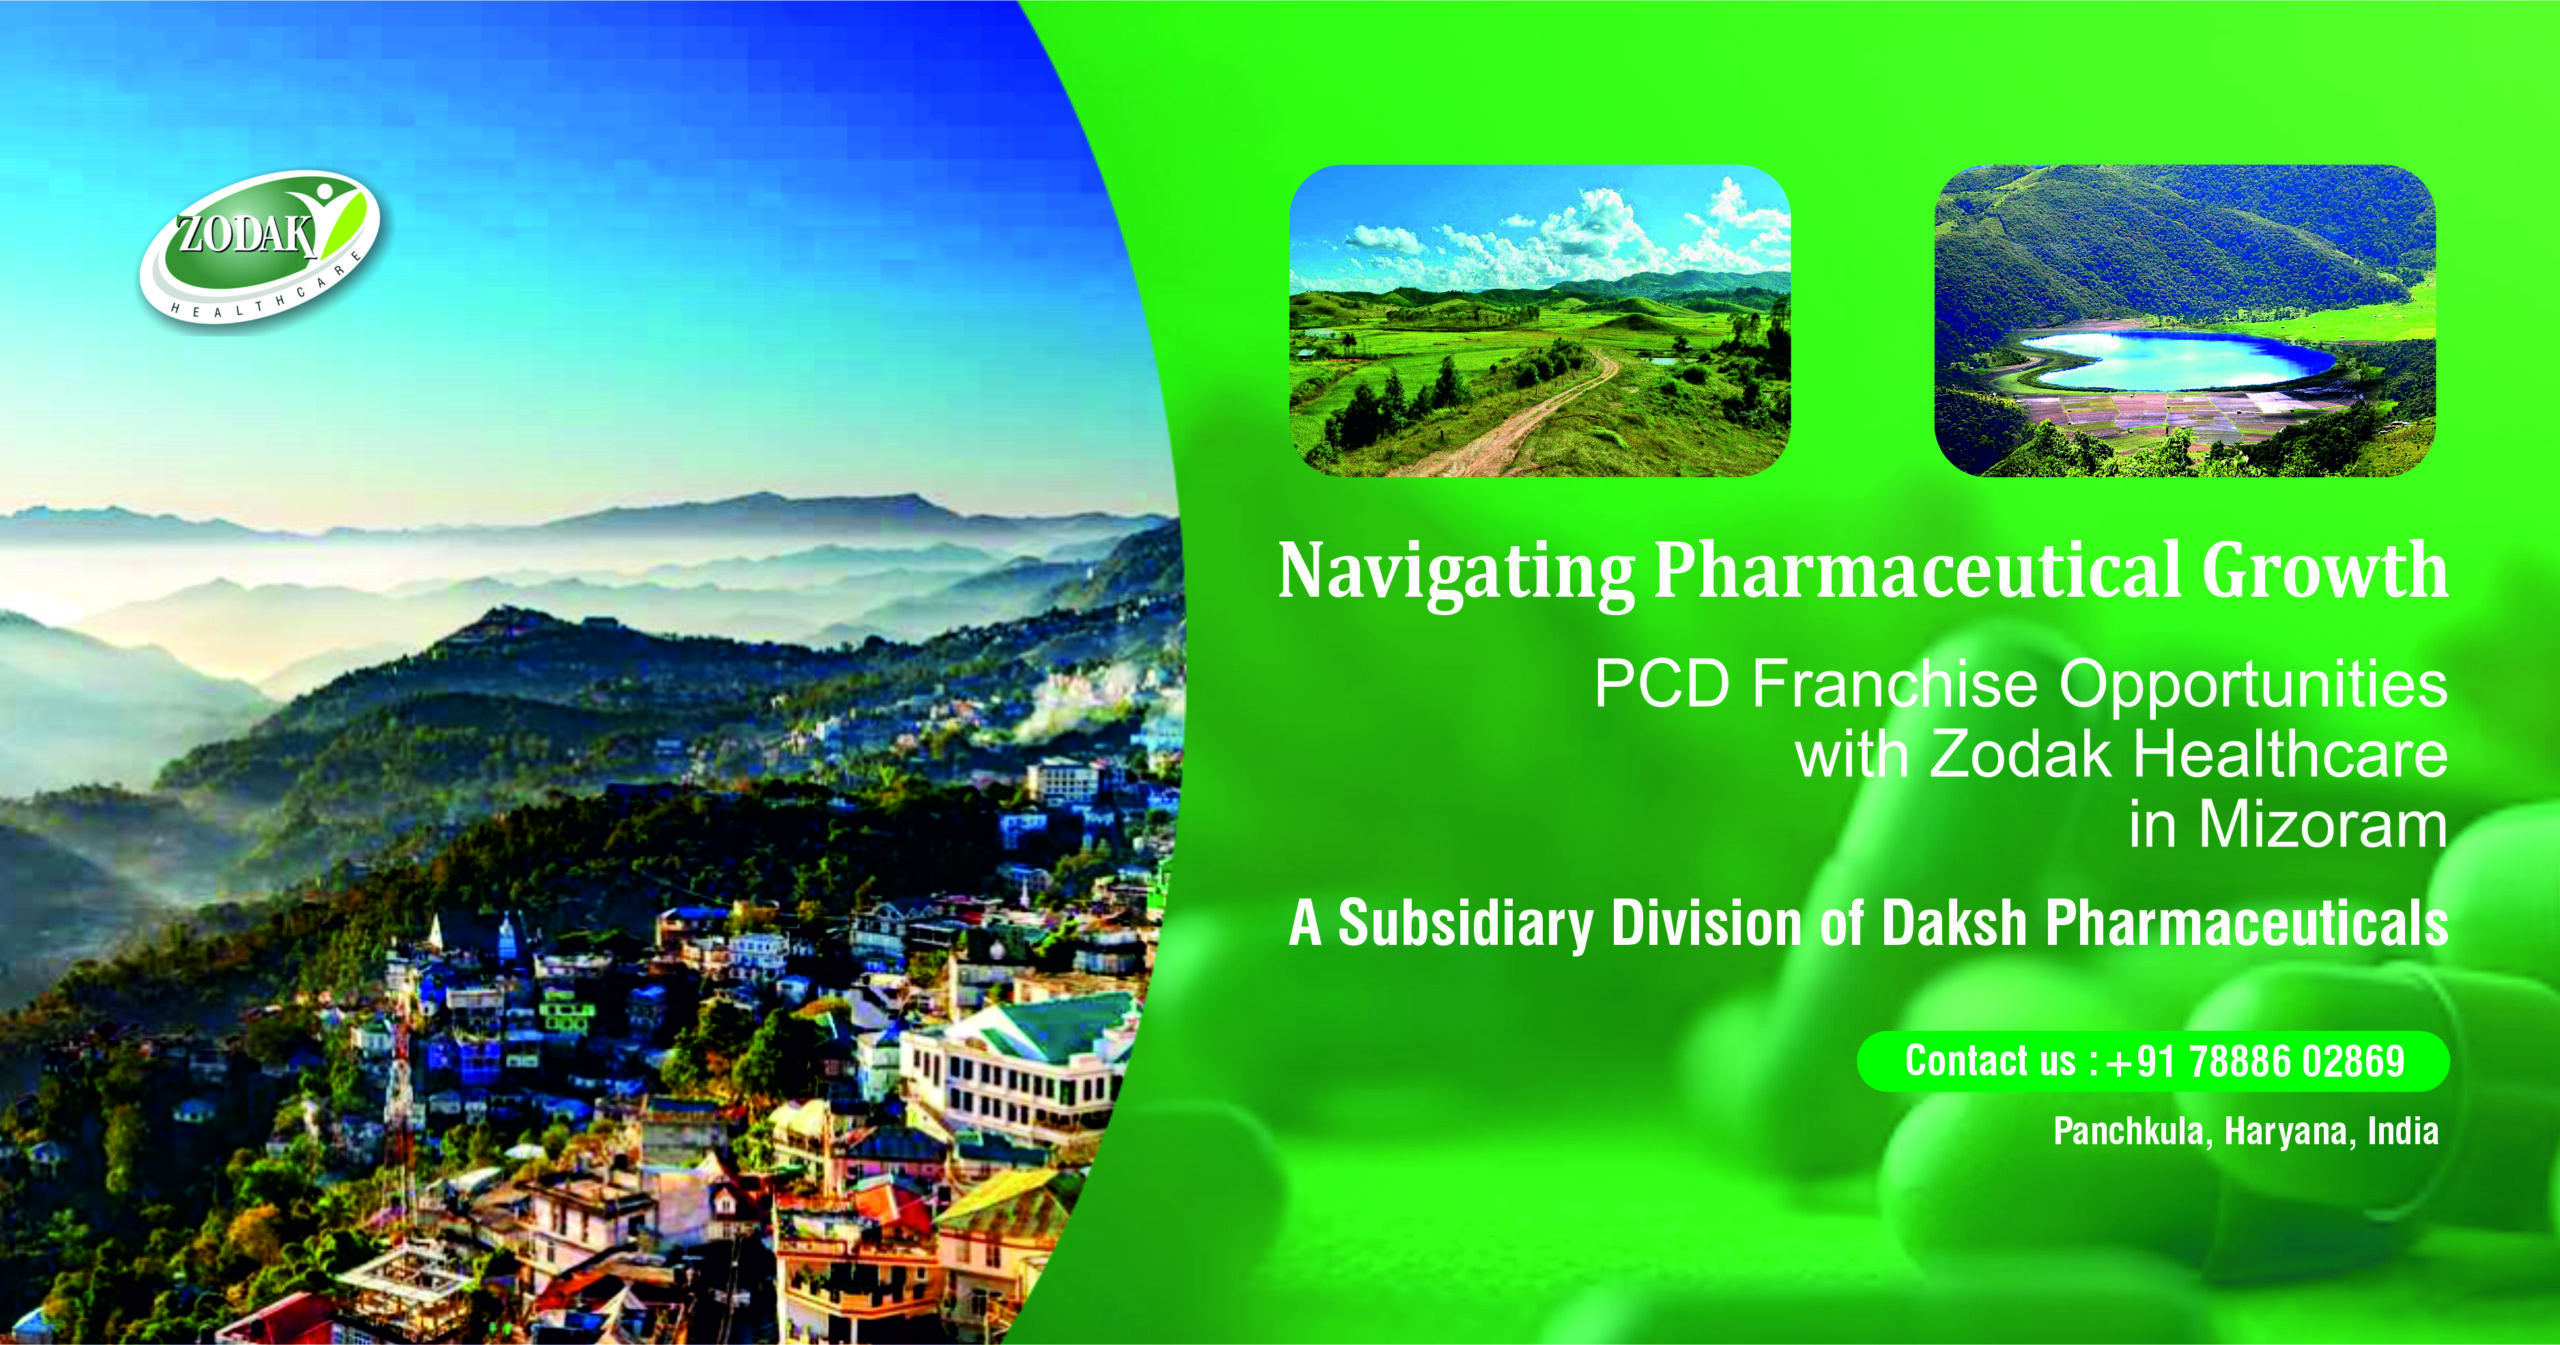 Navigating Pharmaceutical Growth: PCD Franchise Opportunities with Zodak Healthcare in Mizoram